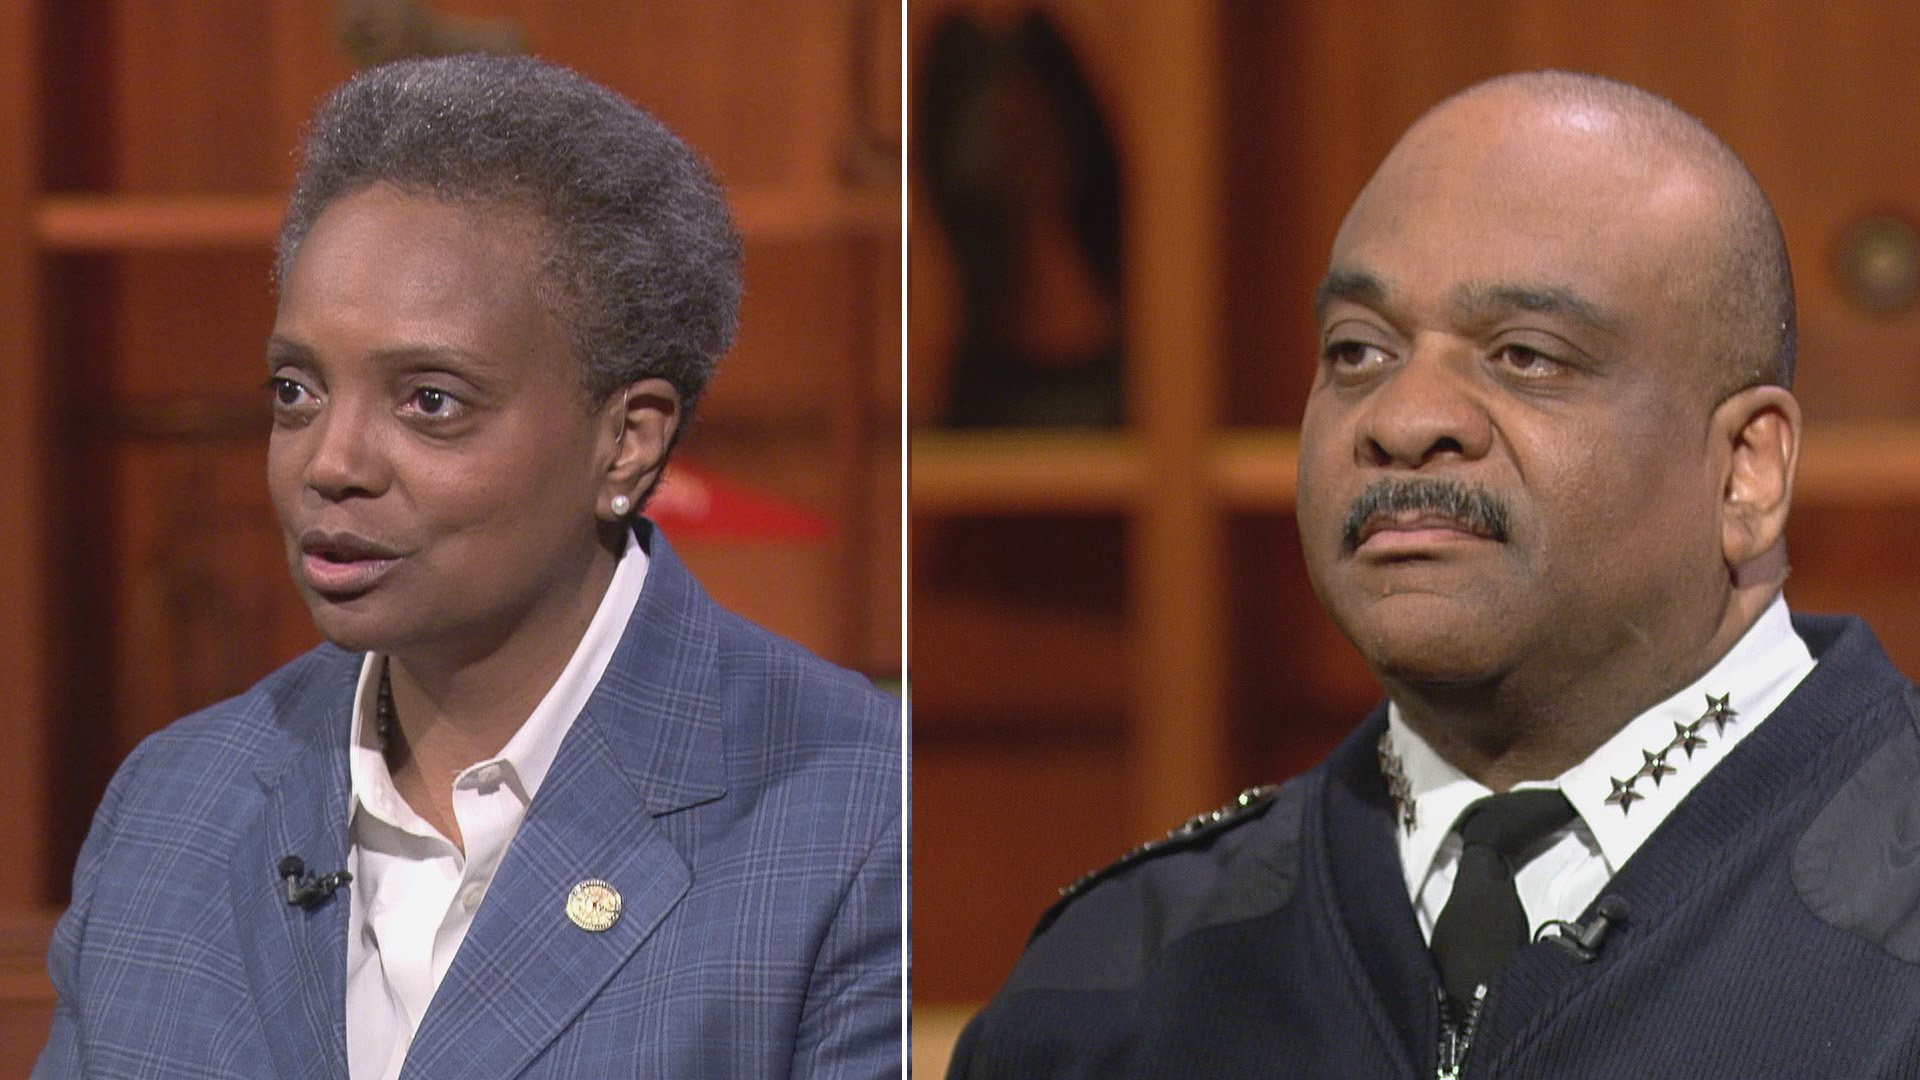 Still images from appearances of Mayor Lori Lightfoot and Chicago Police Superintendent Eddie Johnson on “Chicago Tonight.” Lightfoot spoke to reporters Wednesday about Johnson’s possible retirement this week. (WTTW News)